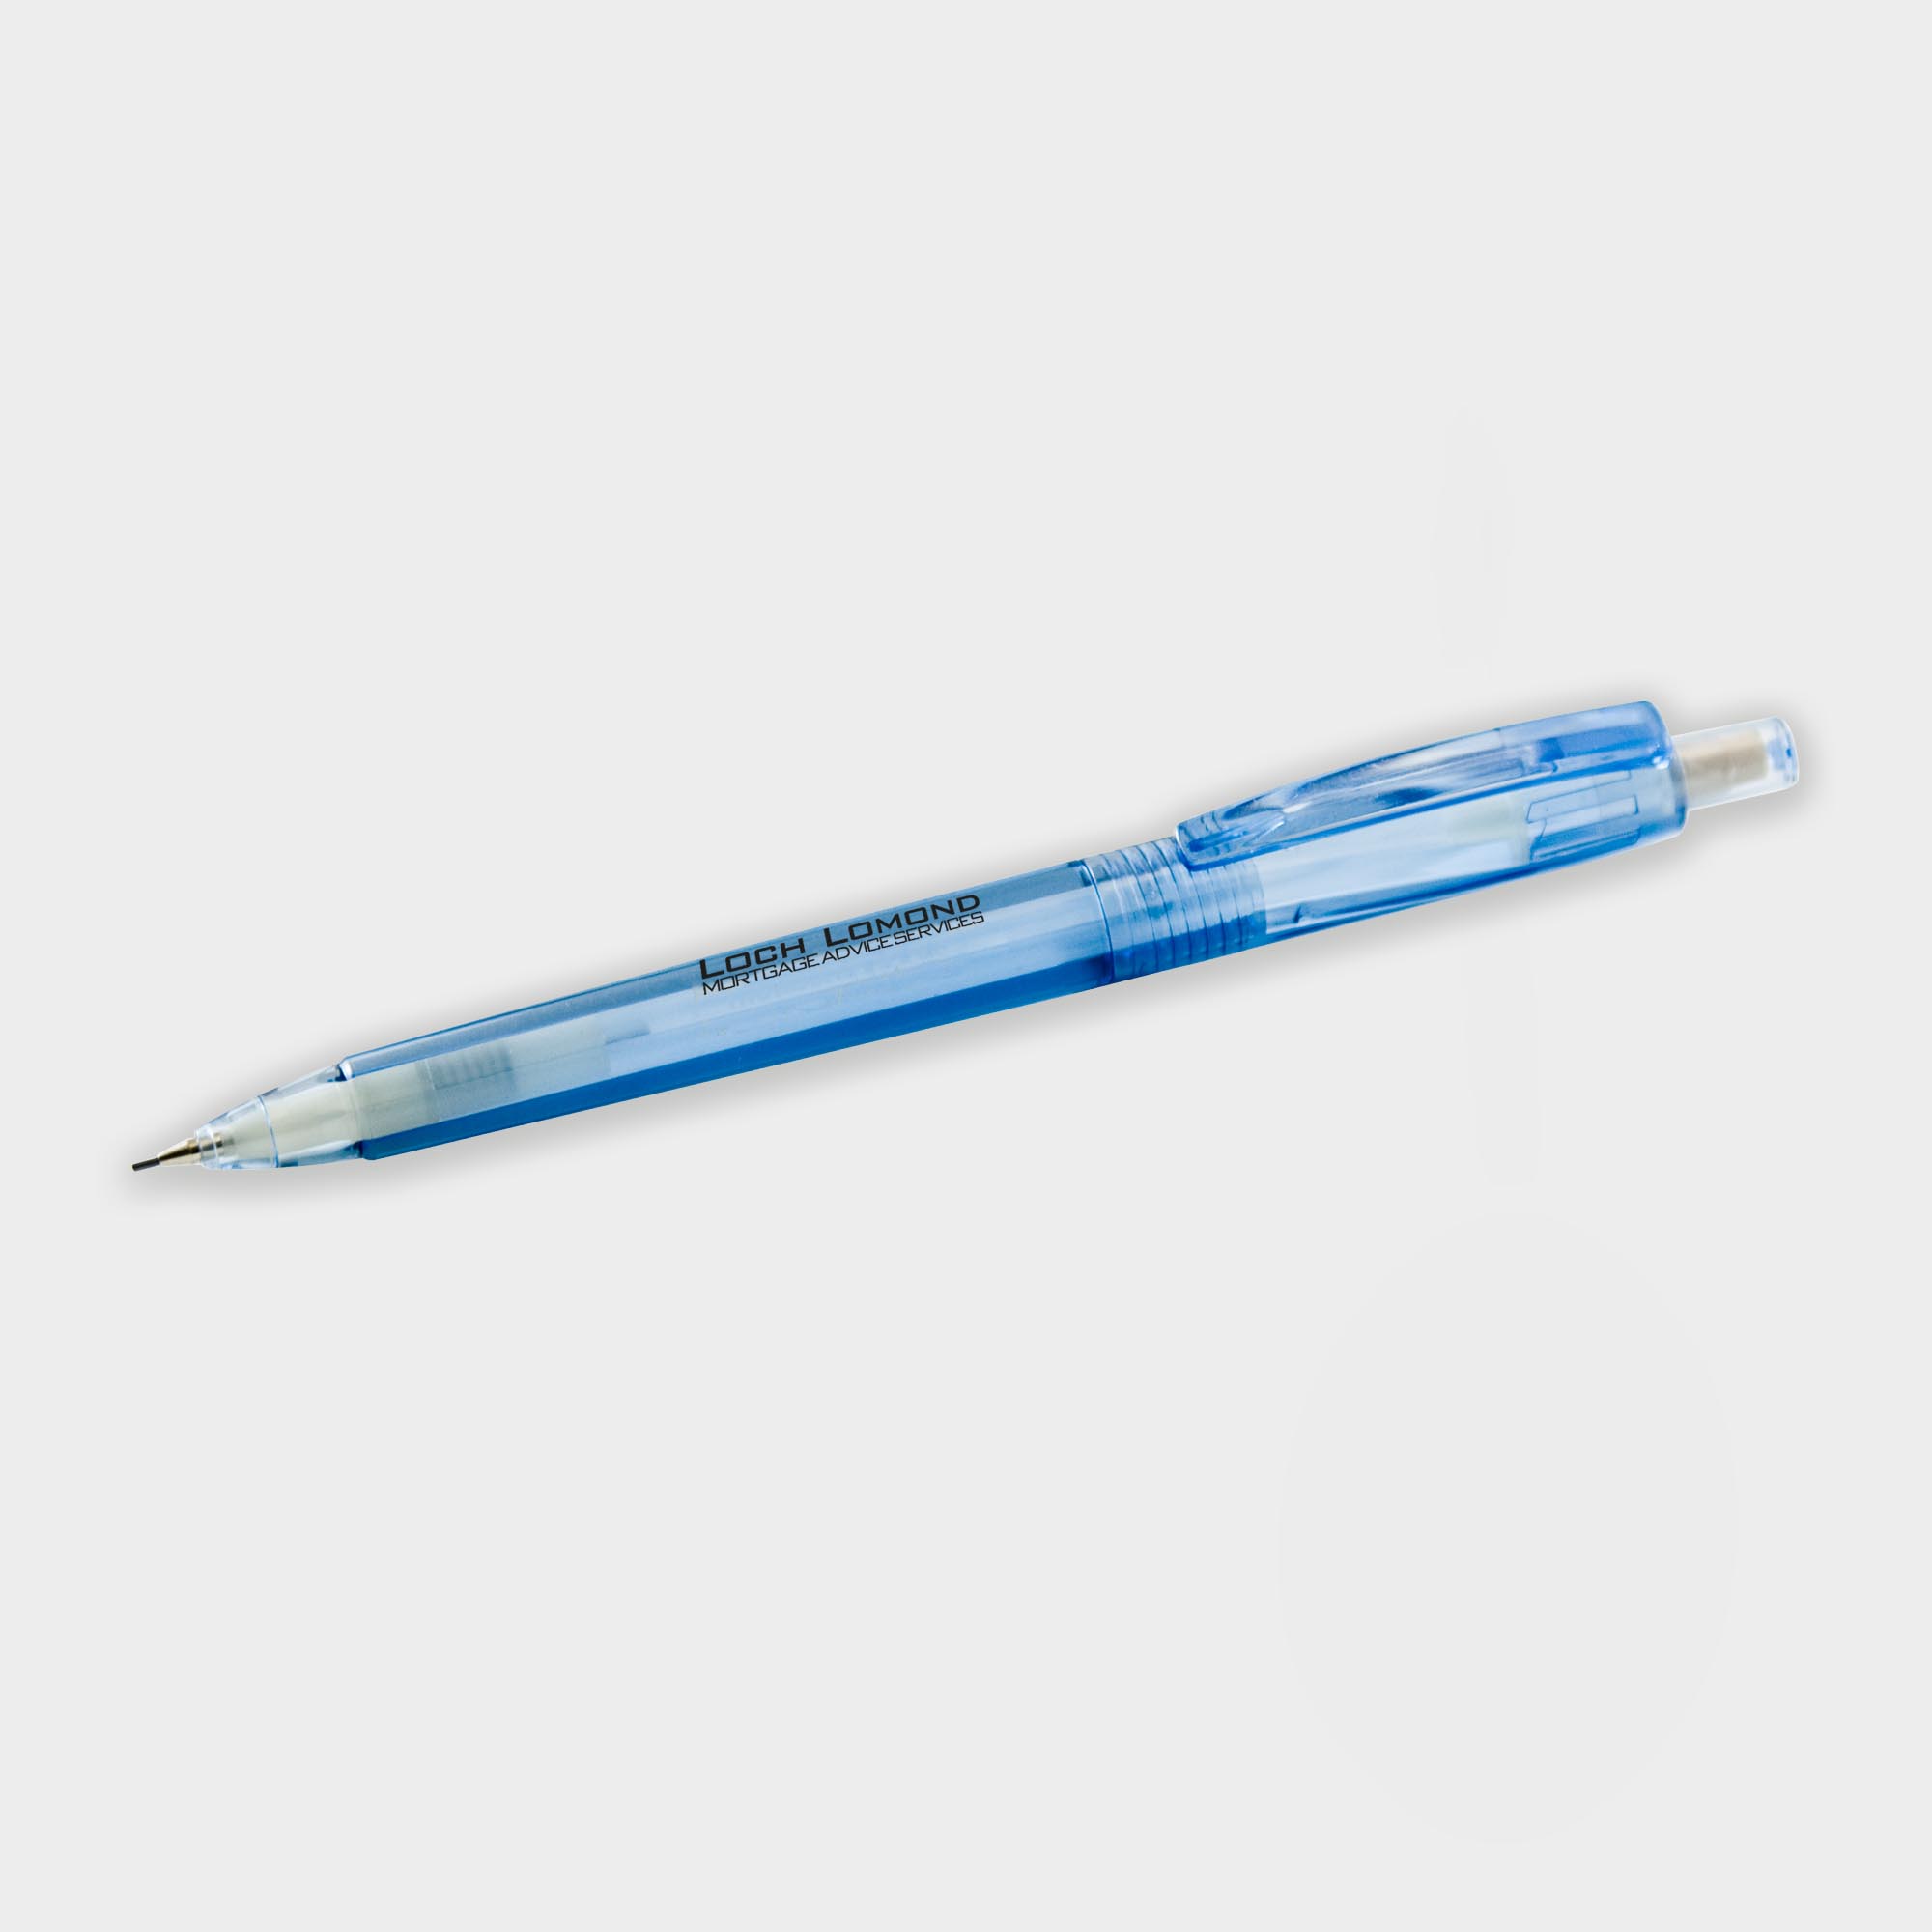 The Green & Good Propelling Pencil made from recycled plastic water bottles